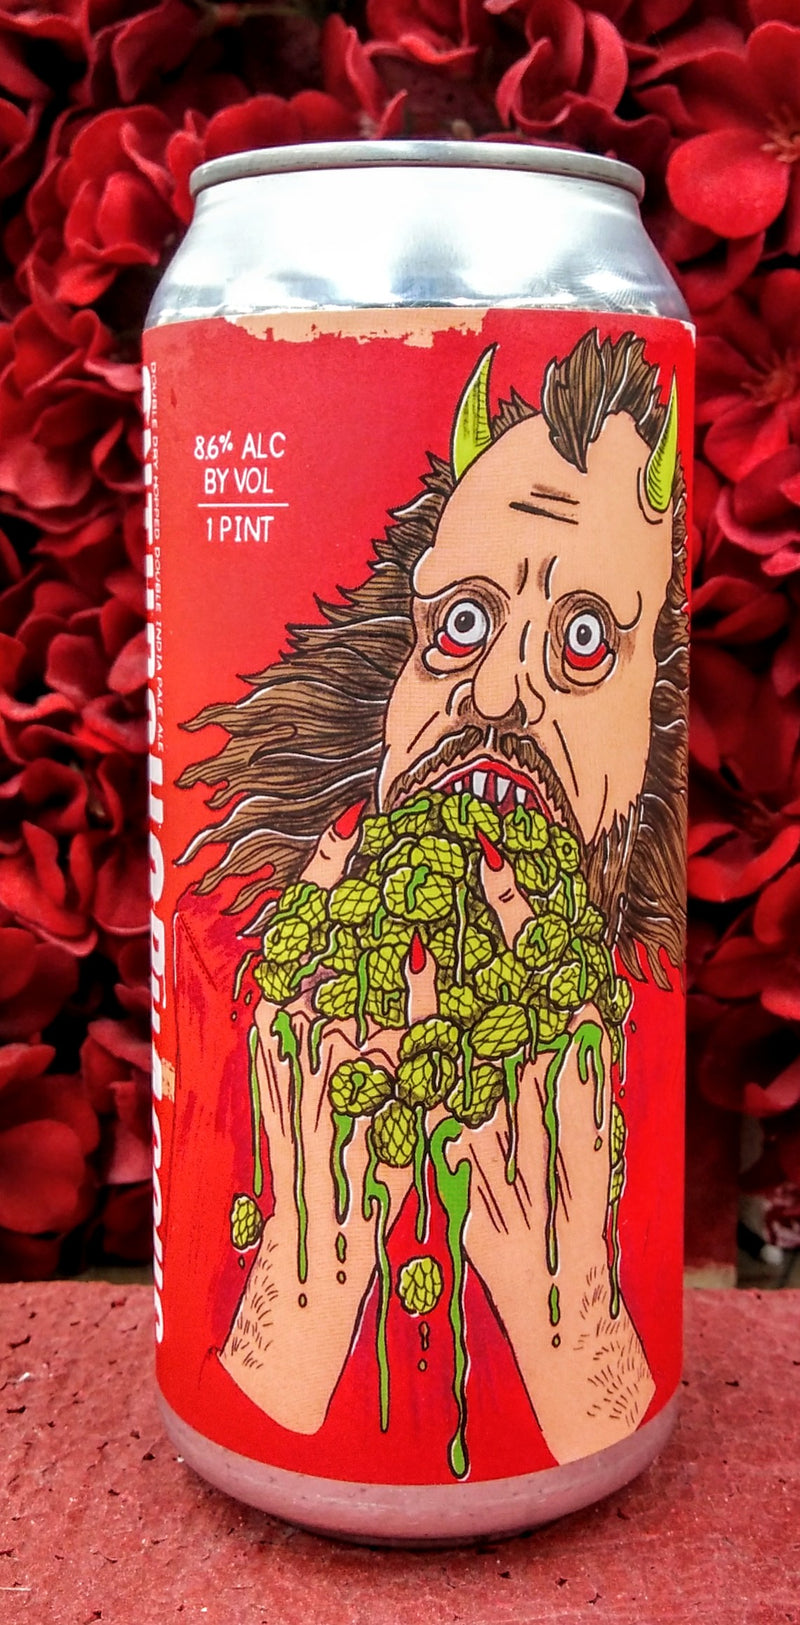 ABOMINATION BREWING CO. ANTHROHOPHAGOUS DOUBLE IPA 16oz can